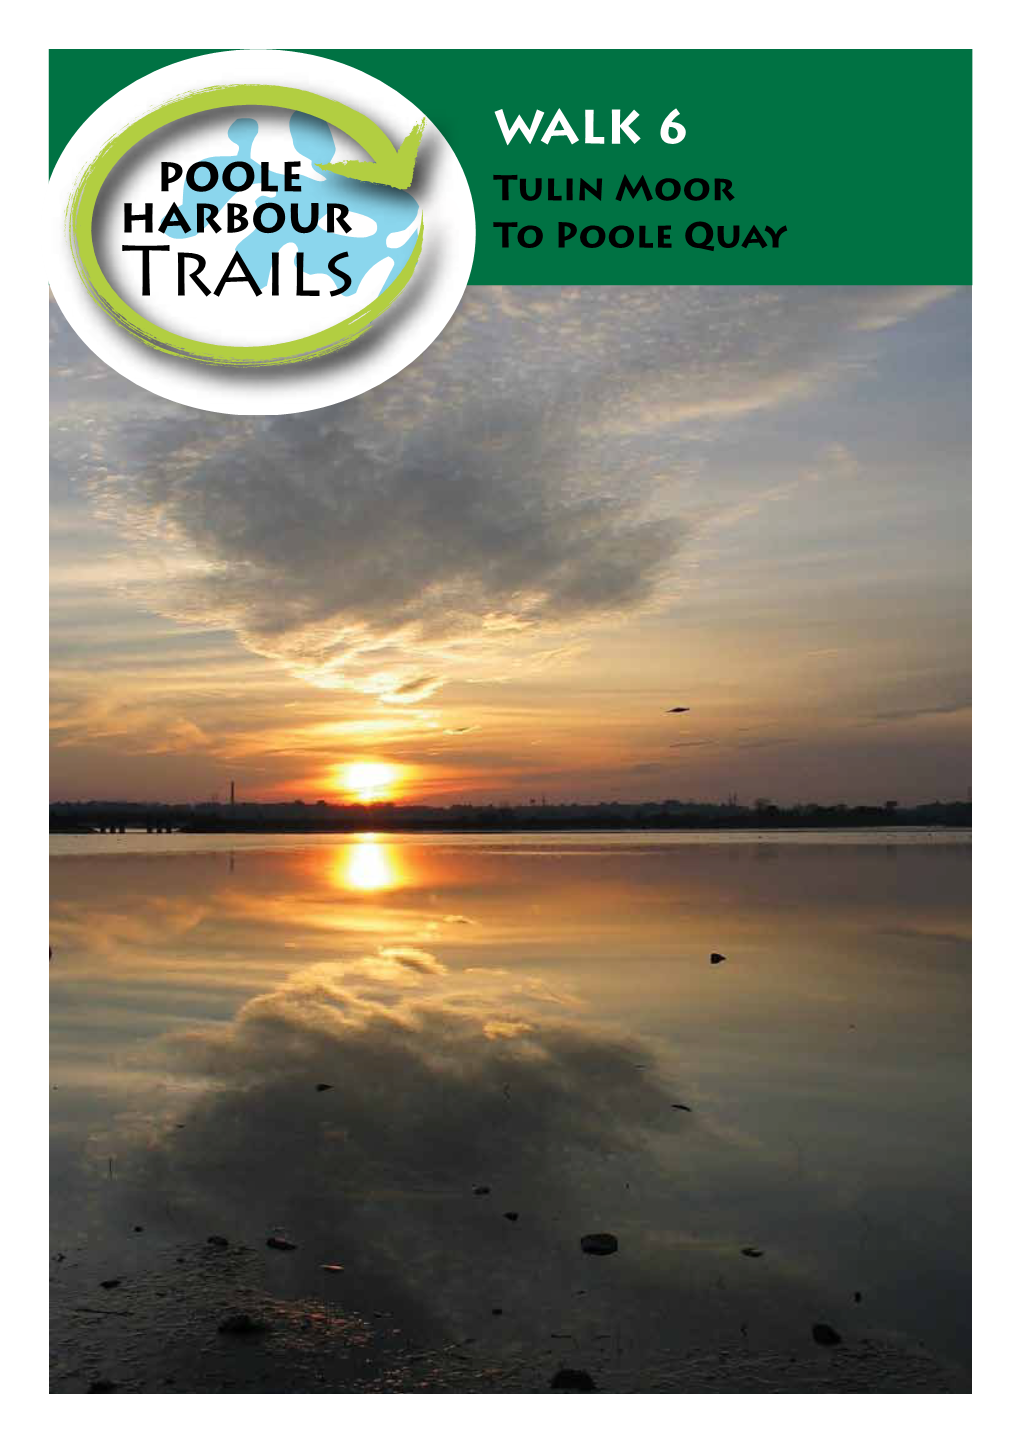 WALK 6 POOLE Tulin Moor HARBOUR to Poole Quay Trails As Far Afield As Kent